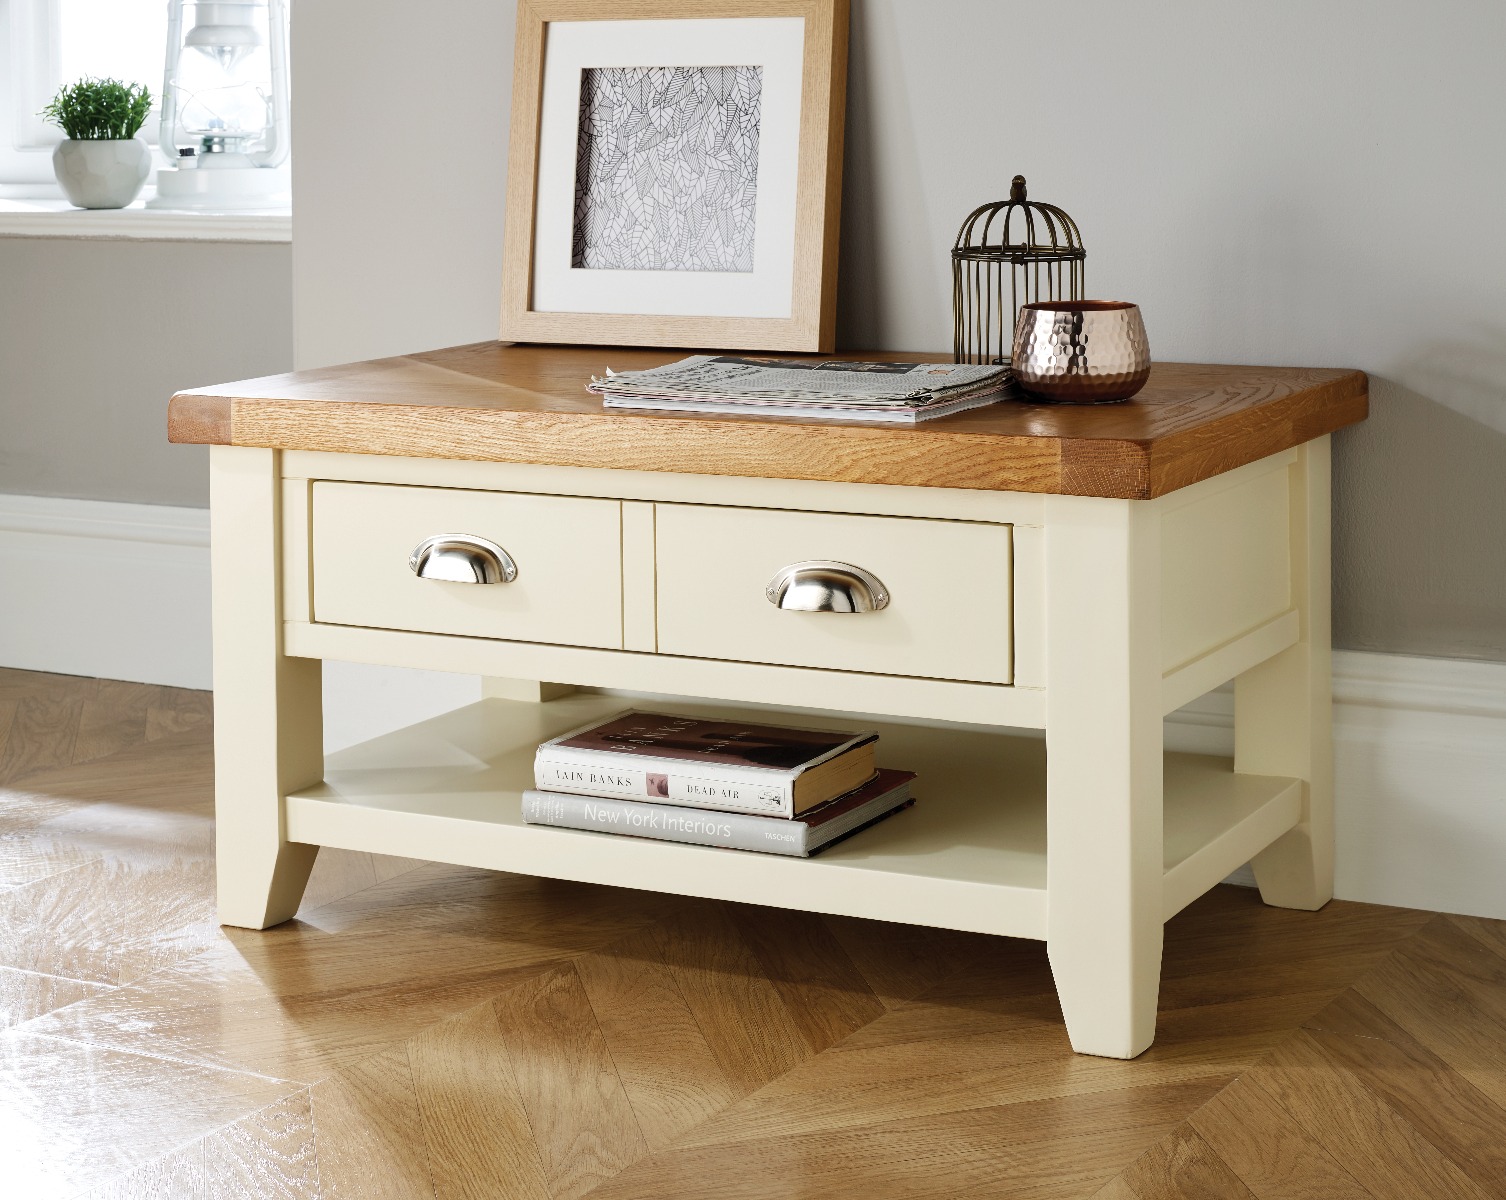 Country Oak Cream Painted Coffee Table With Drawers